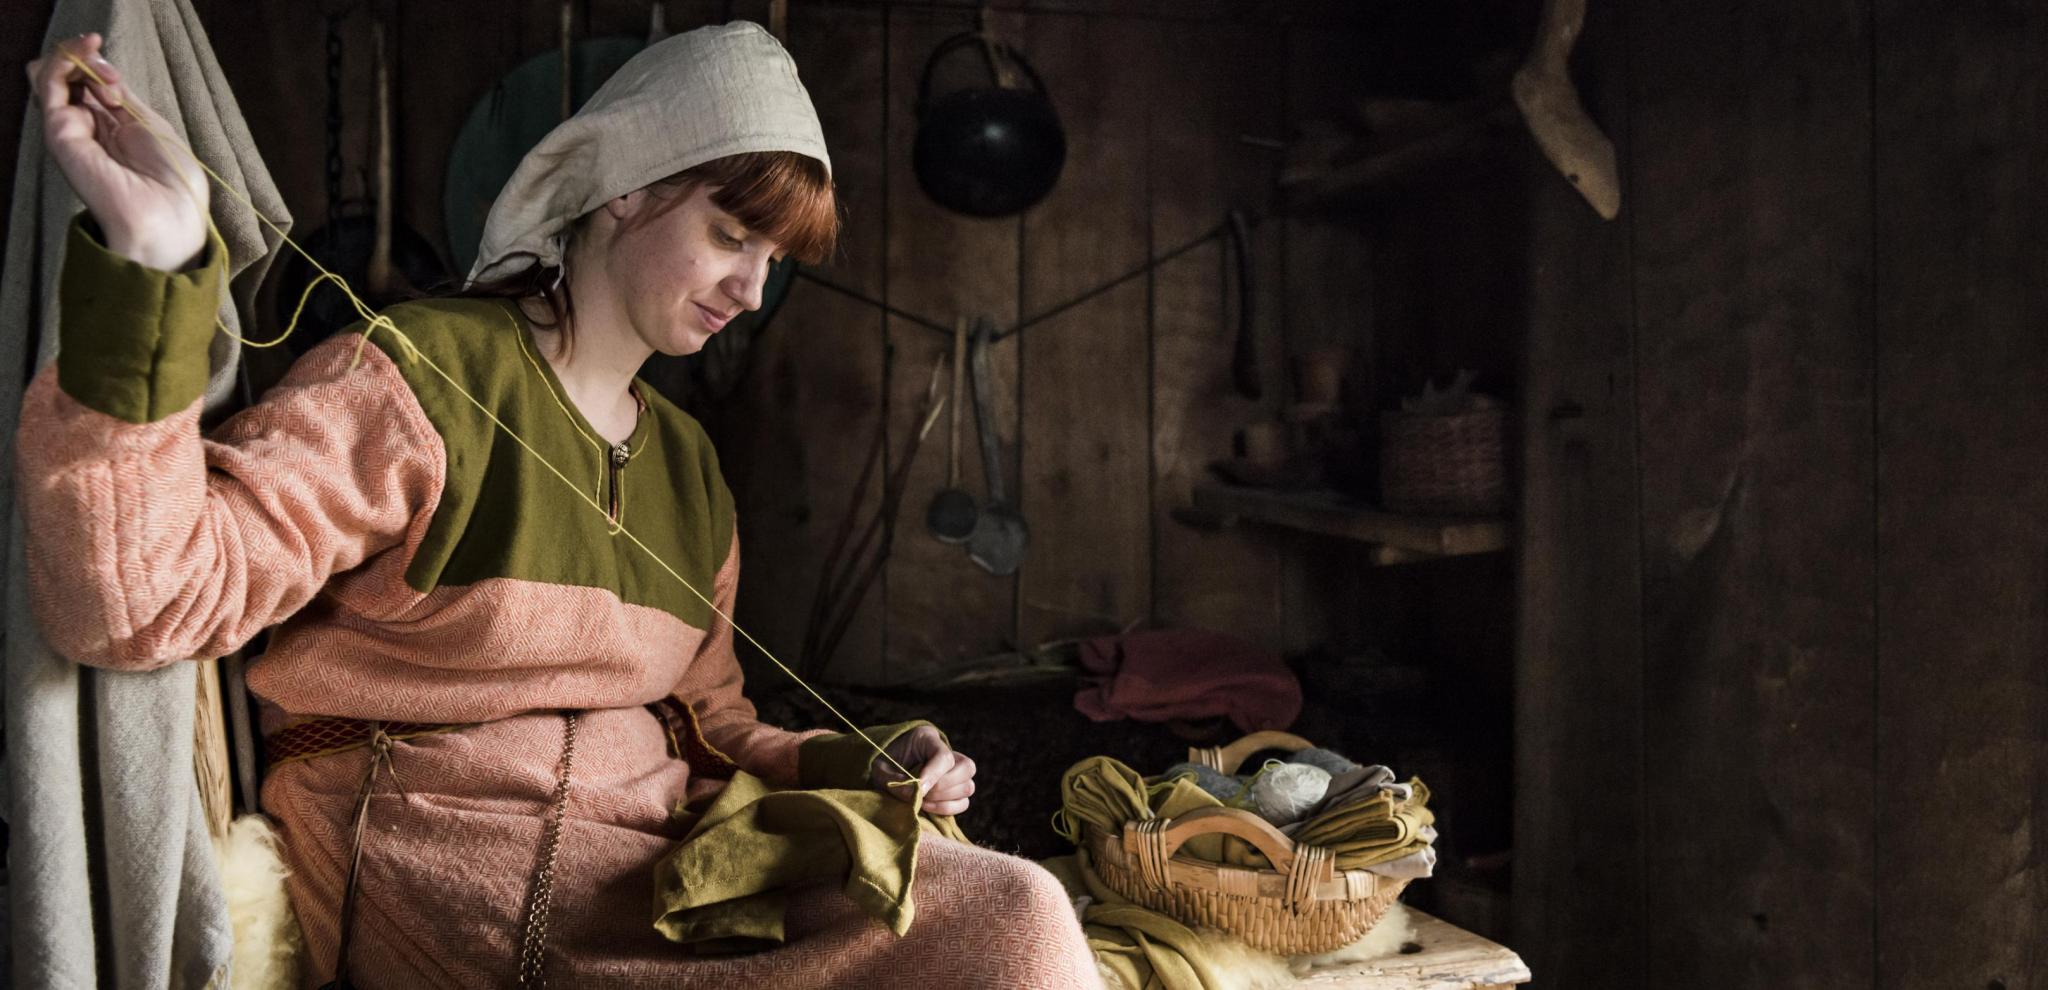 A viking woman sewing on a stool inside a woodhouse